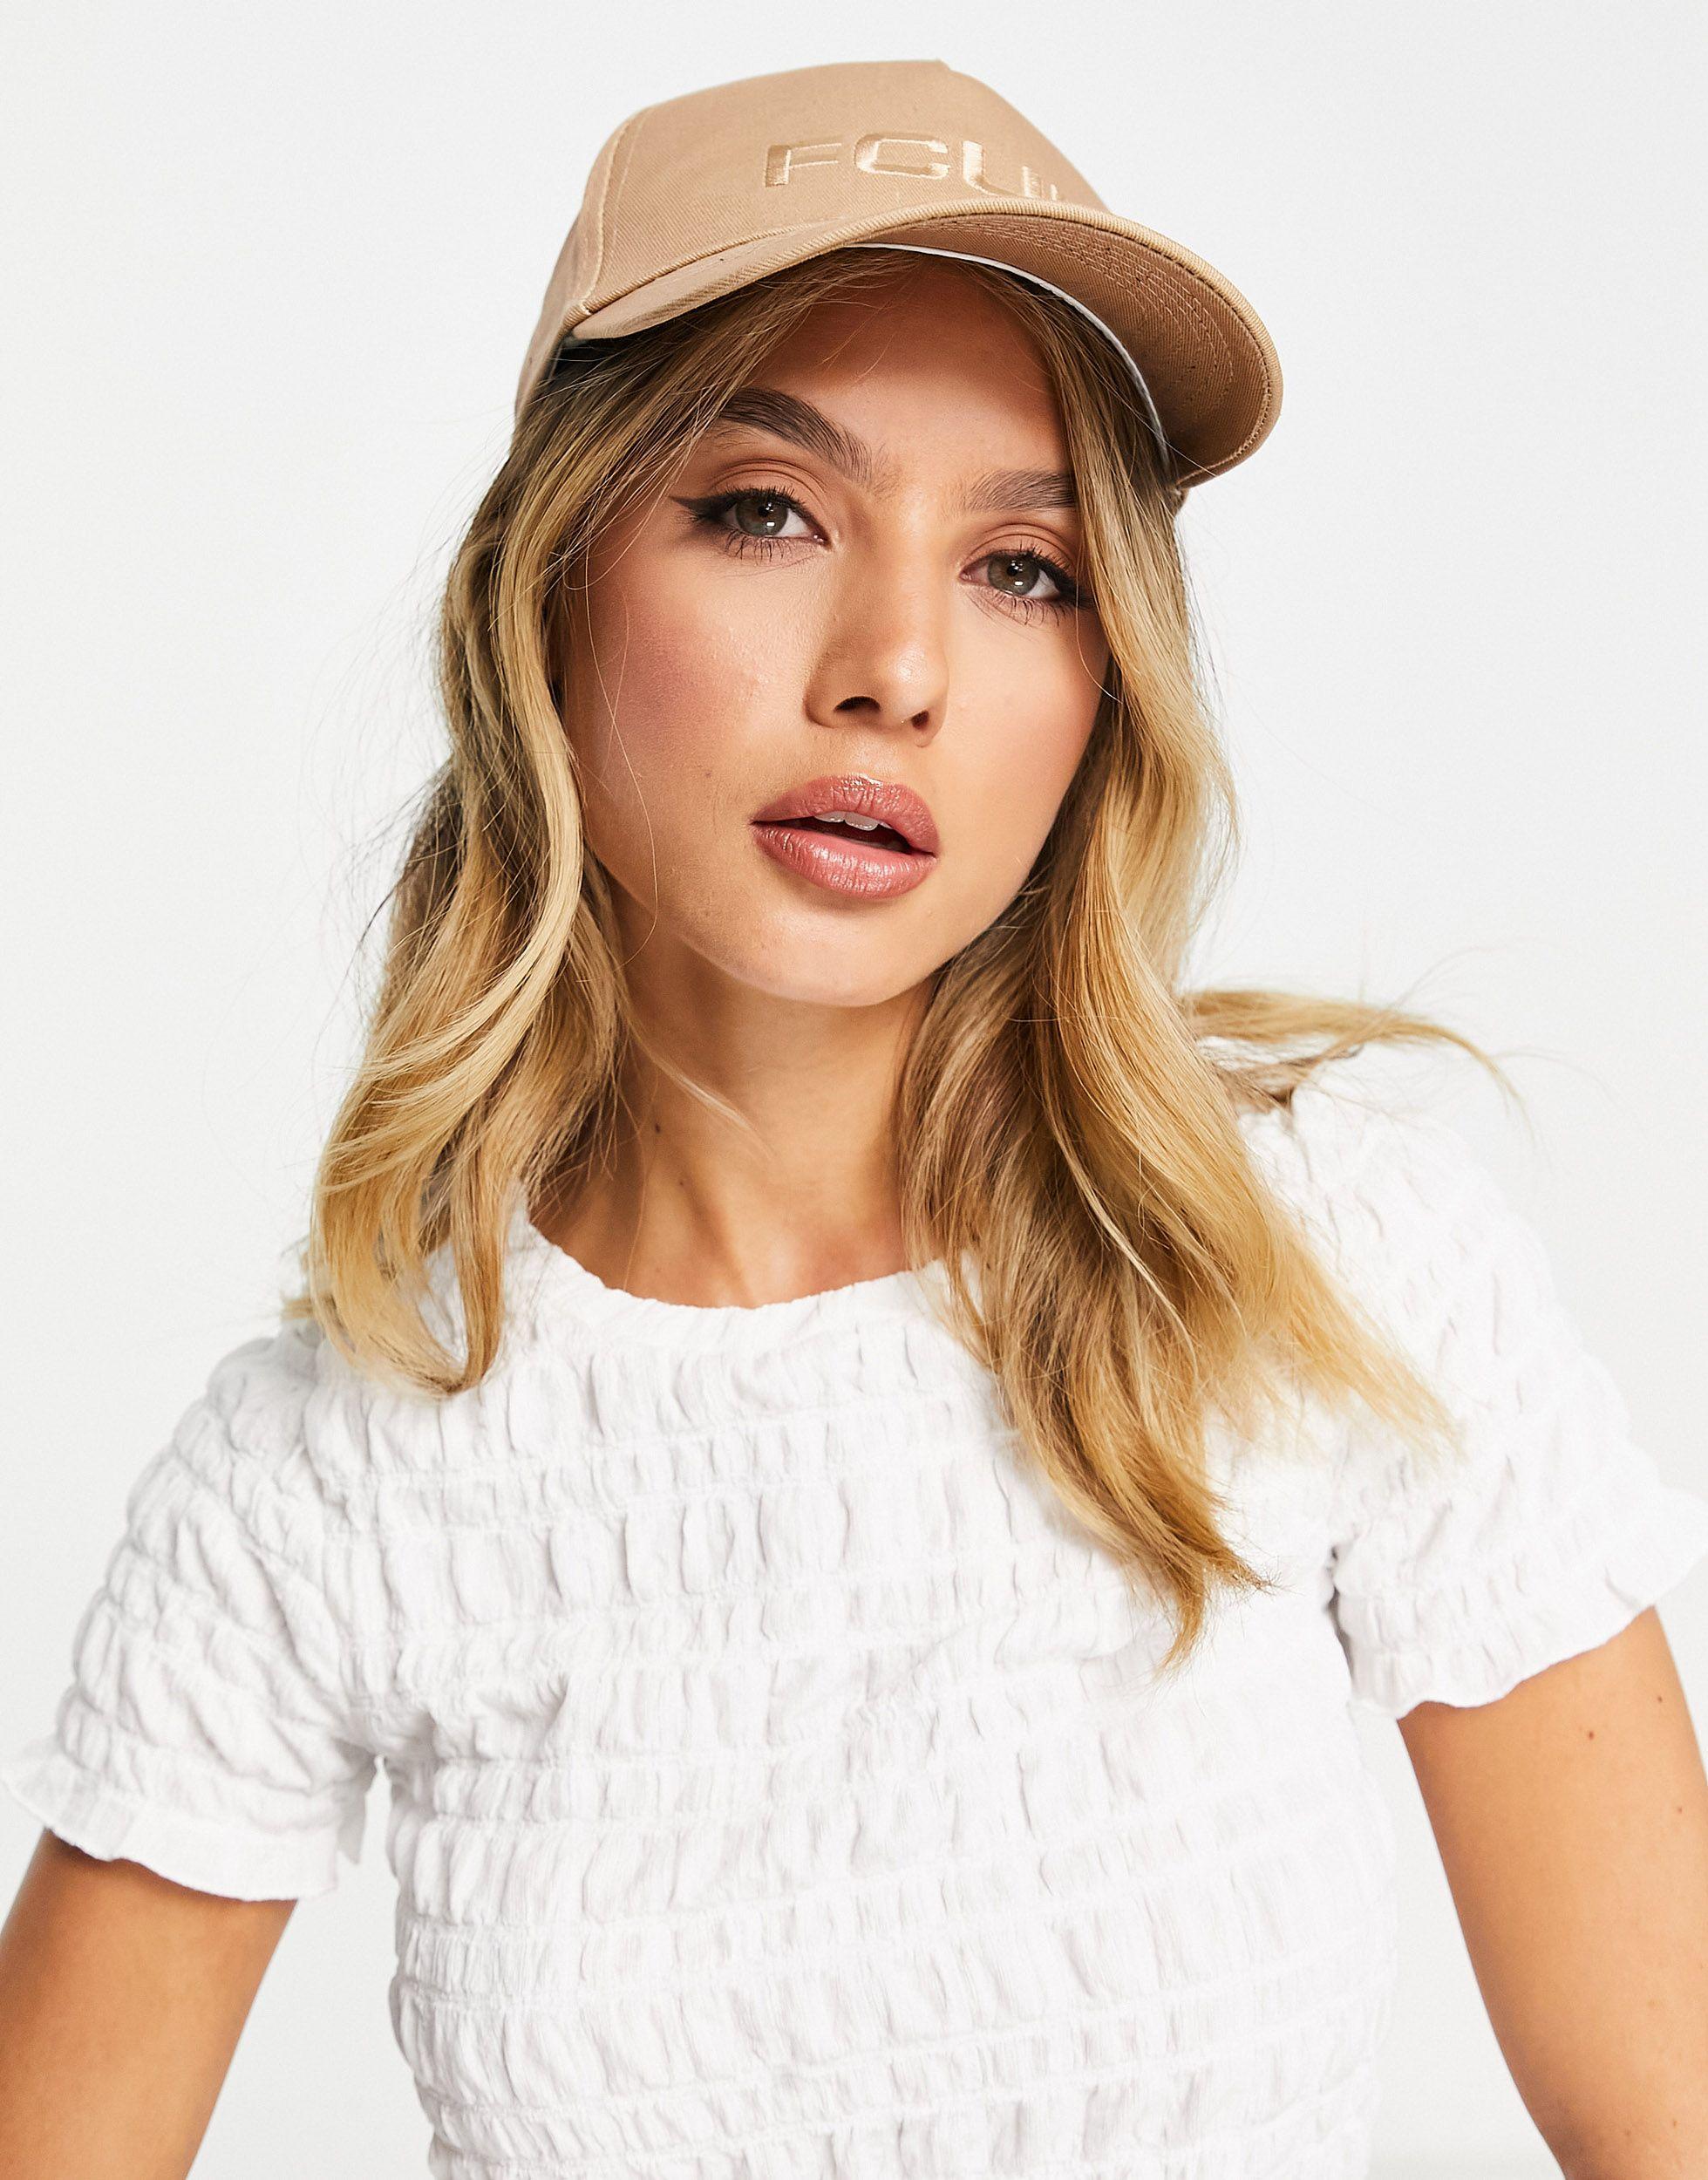 French Connection Cotton Fcuk Logo Baseball Cap in Natural | Lyst UK